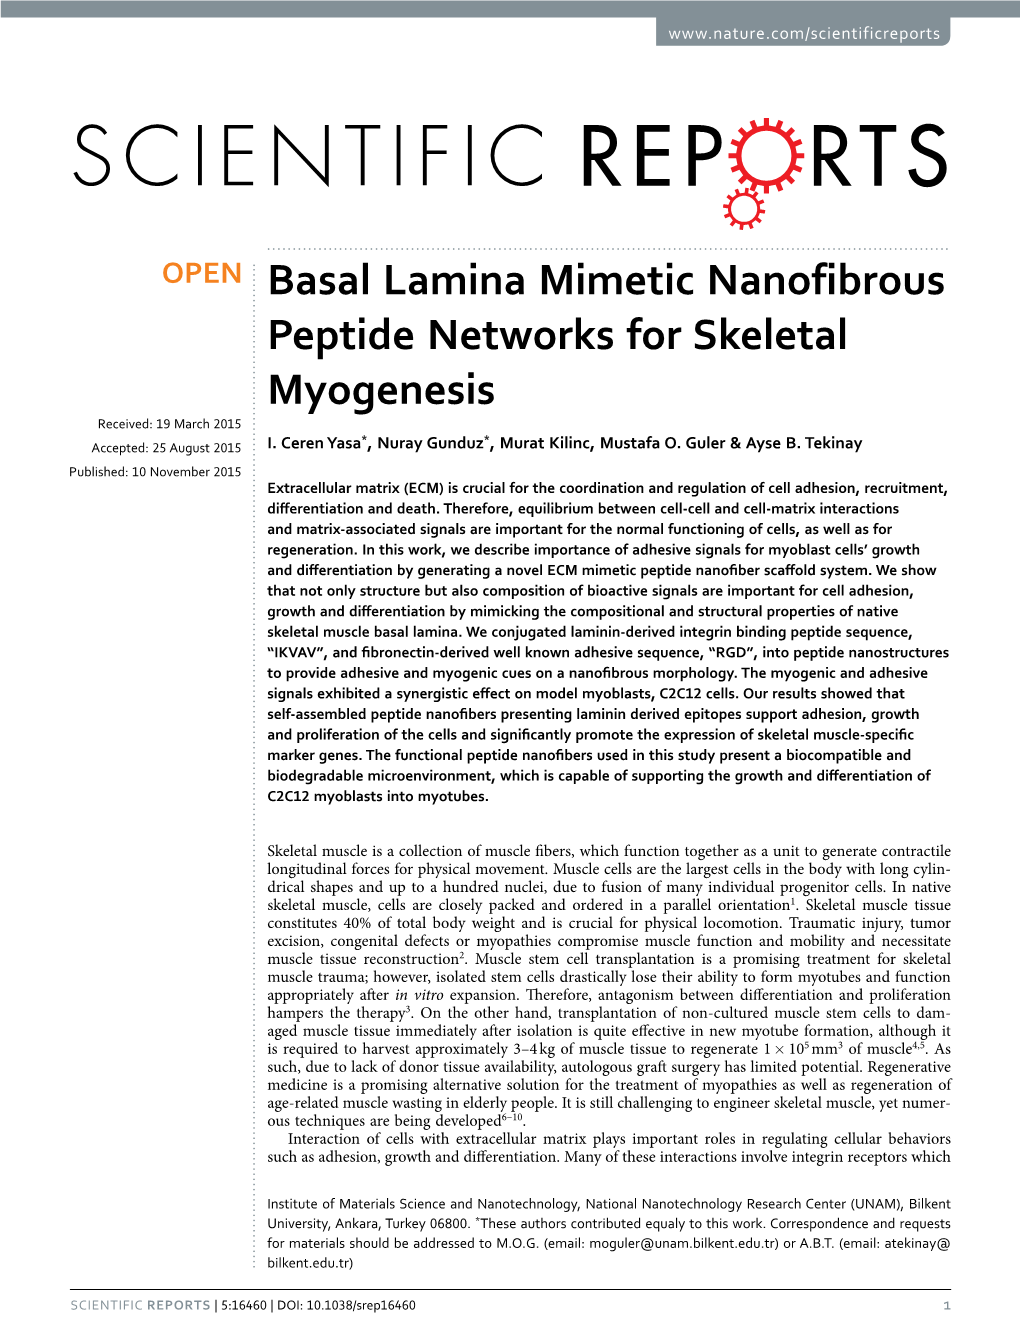 Basal Lamina Mimetic Nanofibrous Peptide Networks for Skeletal Myogenesis Received: 19 March 2015 * * Accepted: 25 August 2015 I